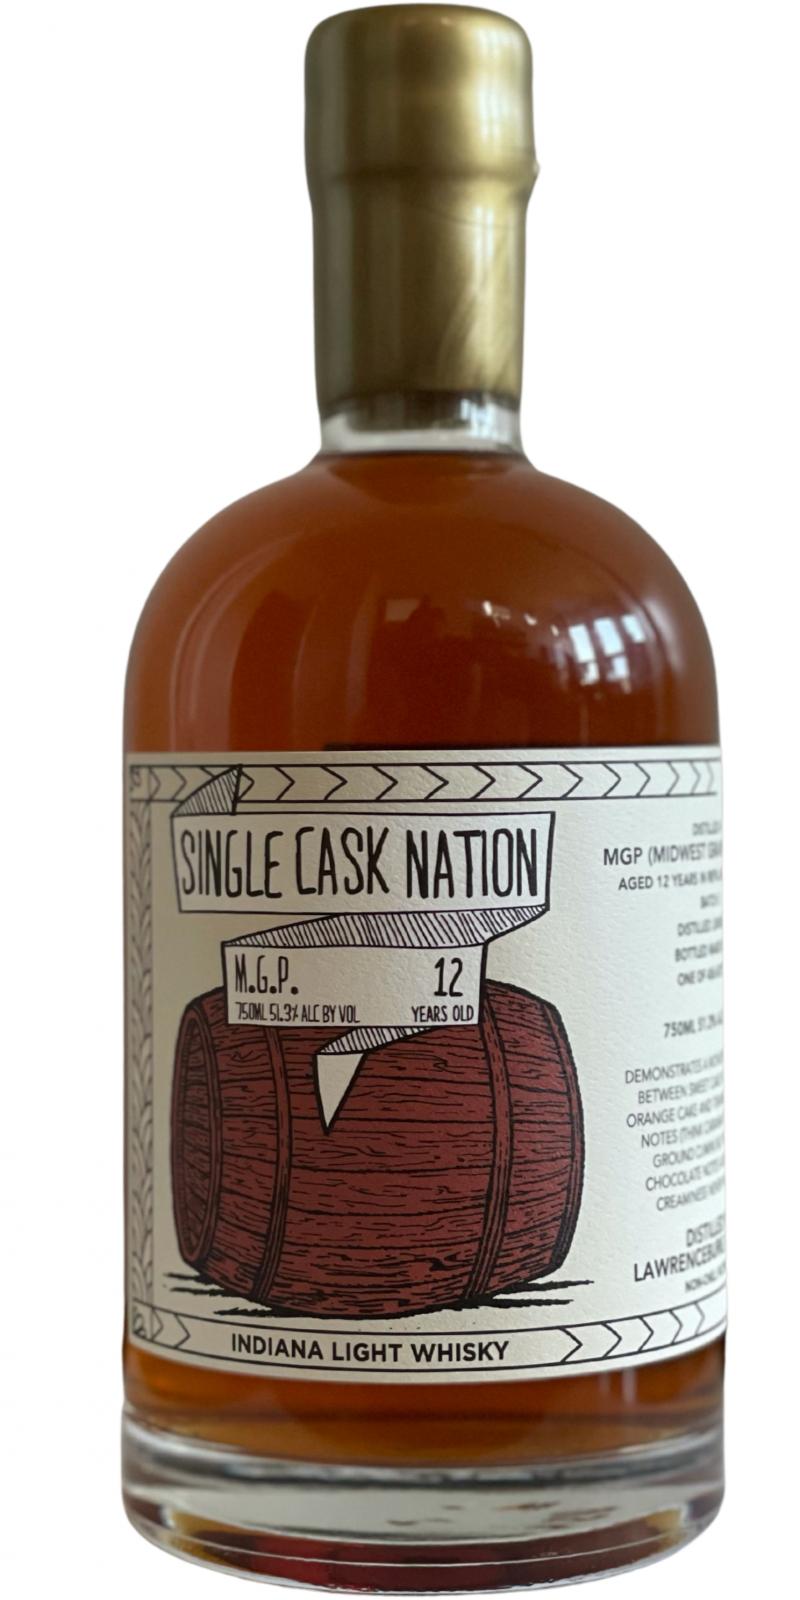 Single Cask Nation 12-year-old JWC